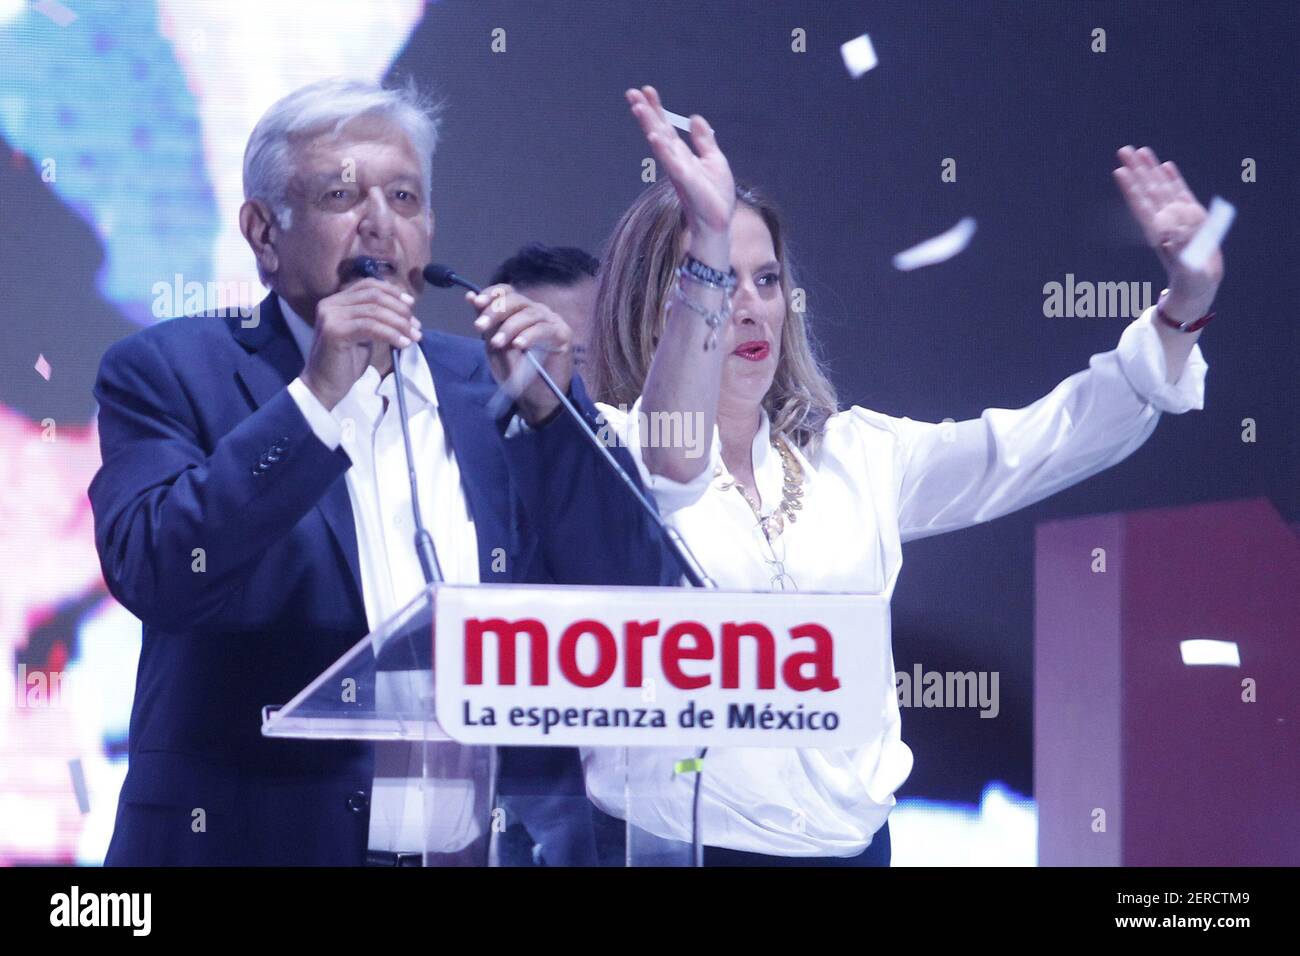 Andres Manuel Lopez Obrador Elected President of Mexico City and his wife Beatriz Gutiérrez Müller 1 july 2018 (Photos by Liliana Ampudia Mendez/Sipa USA) Stock Photo